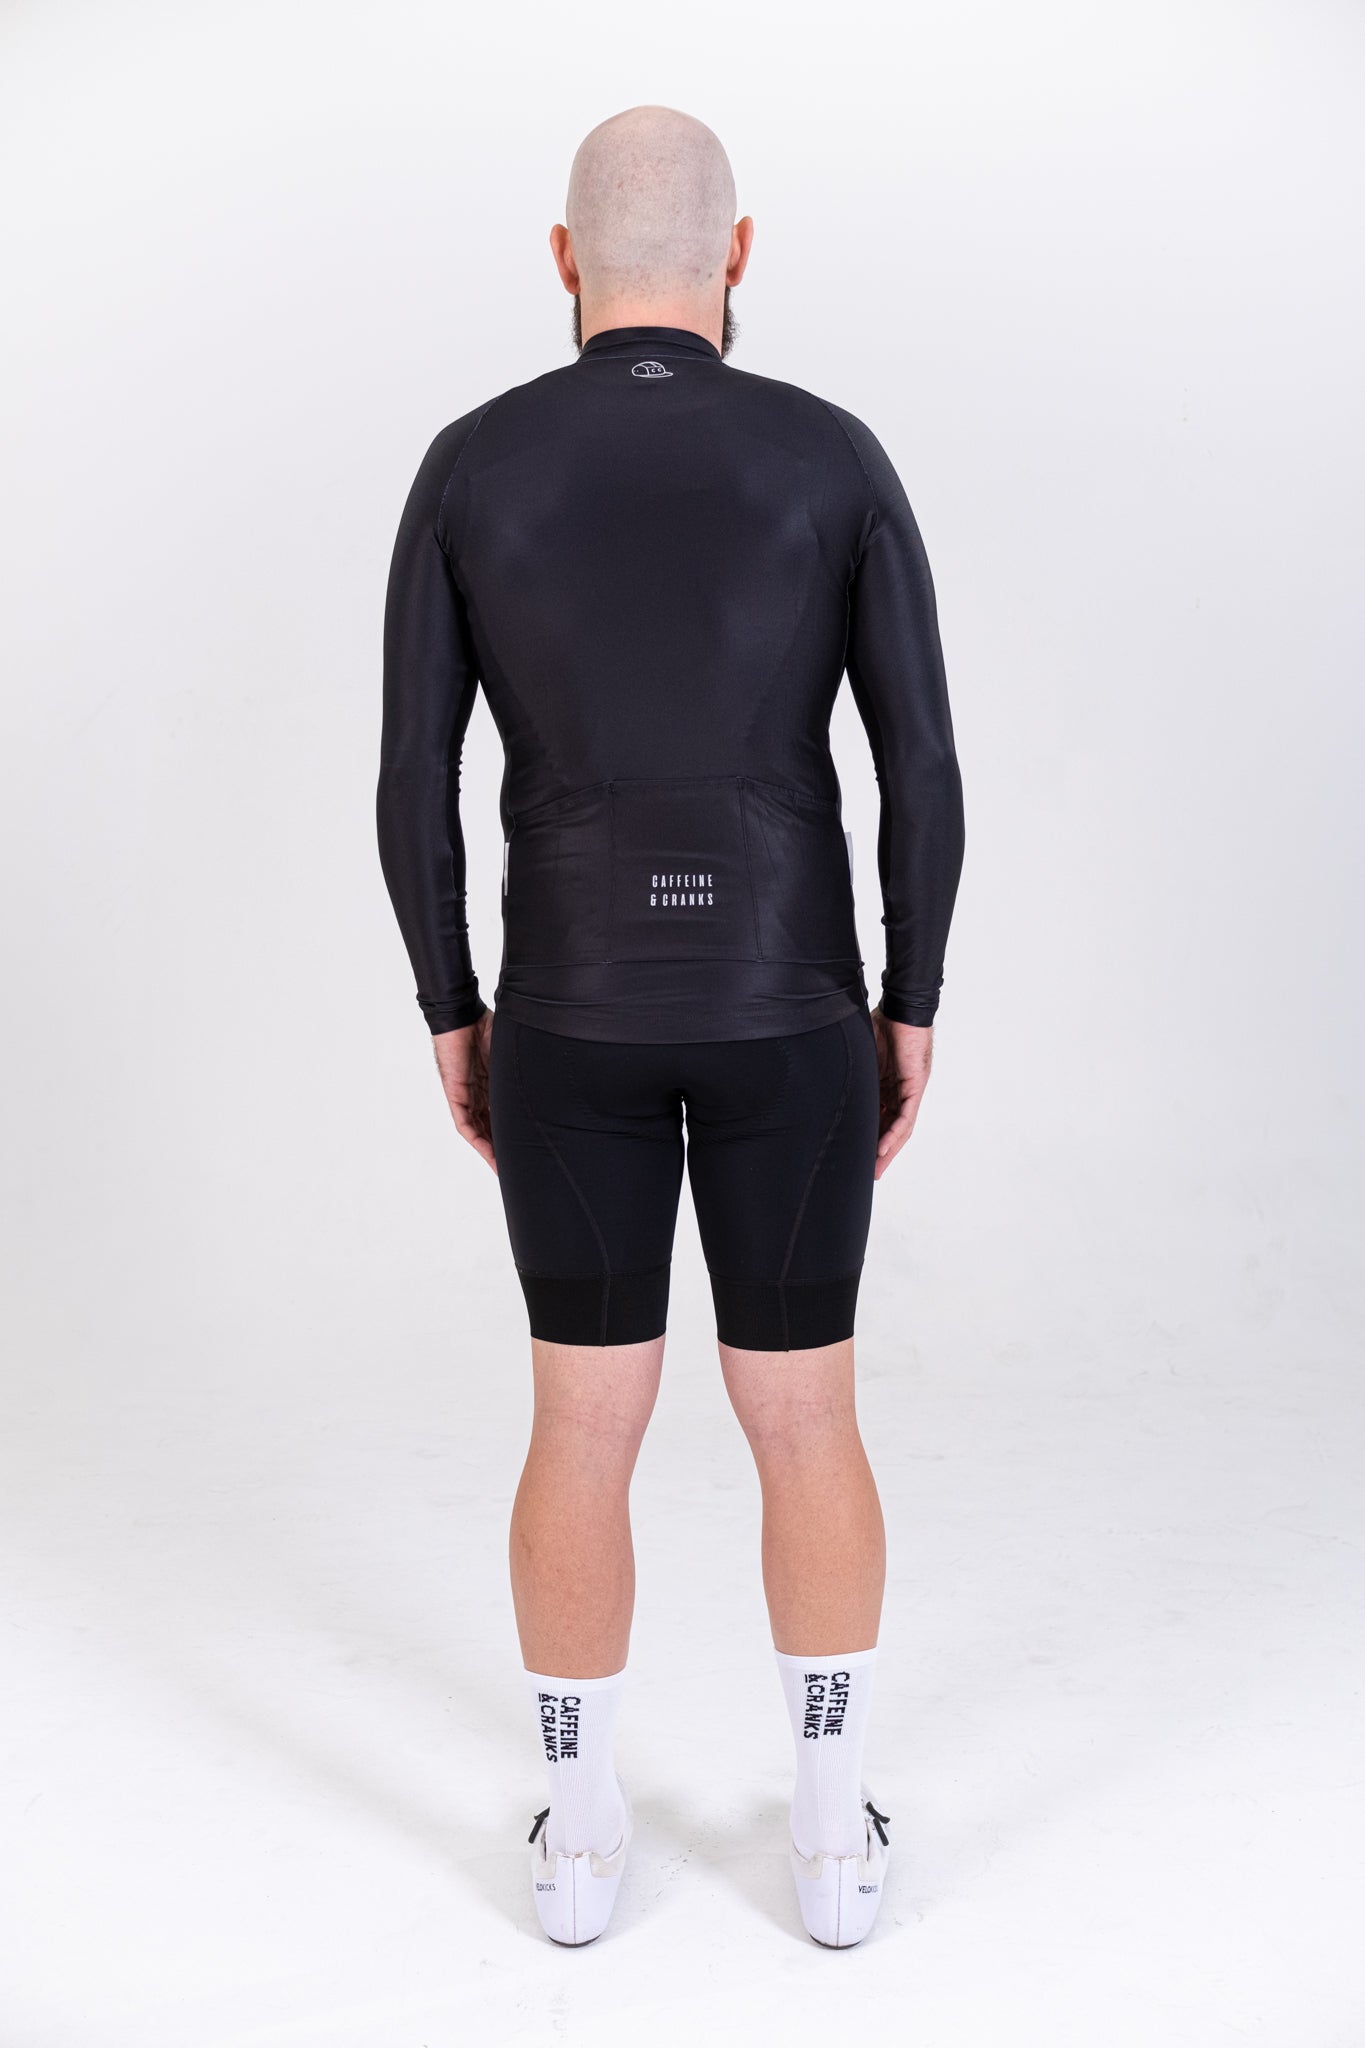 Core Thermal Jersey - Black